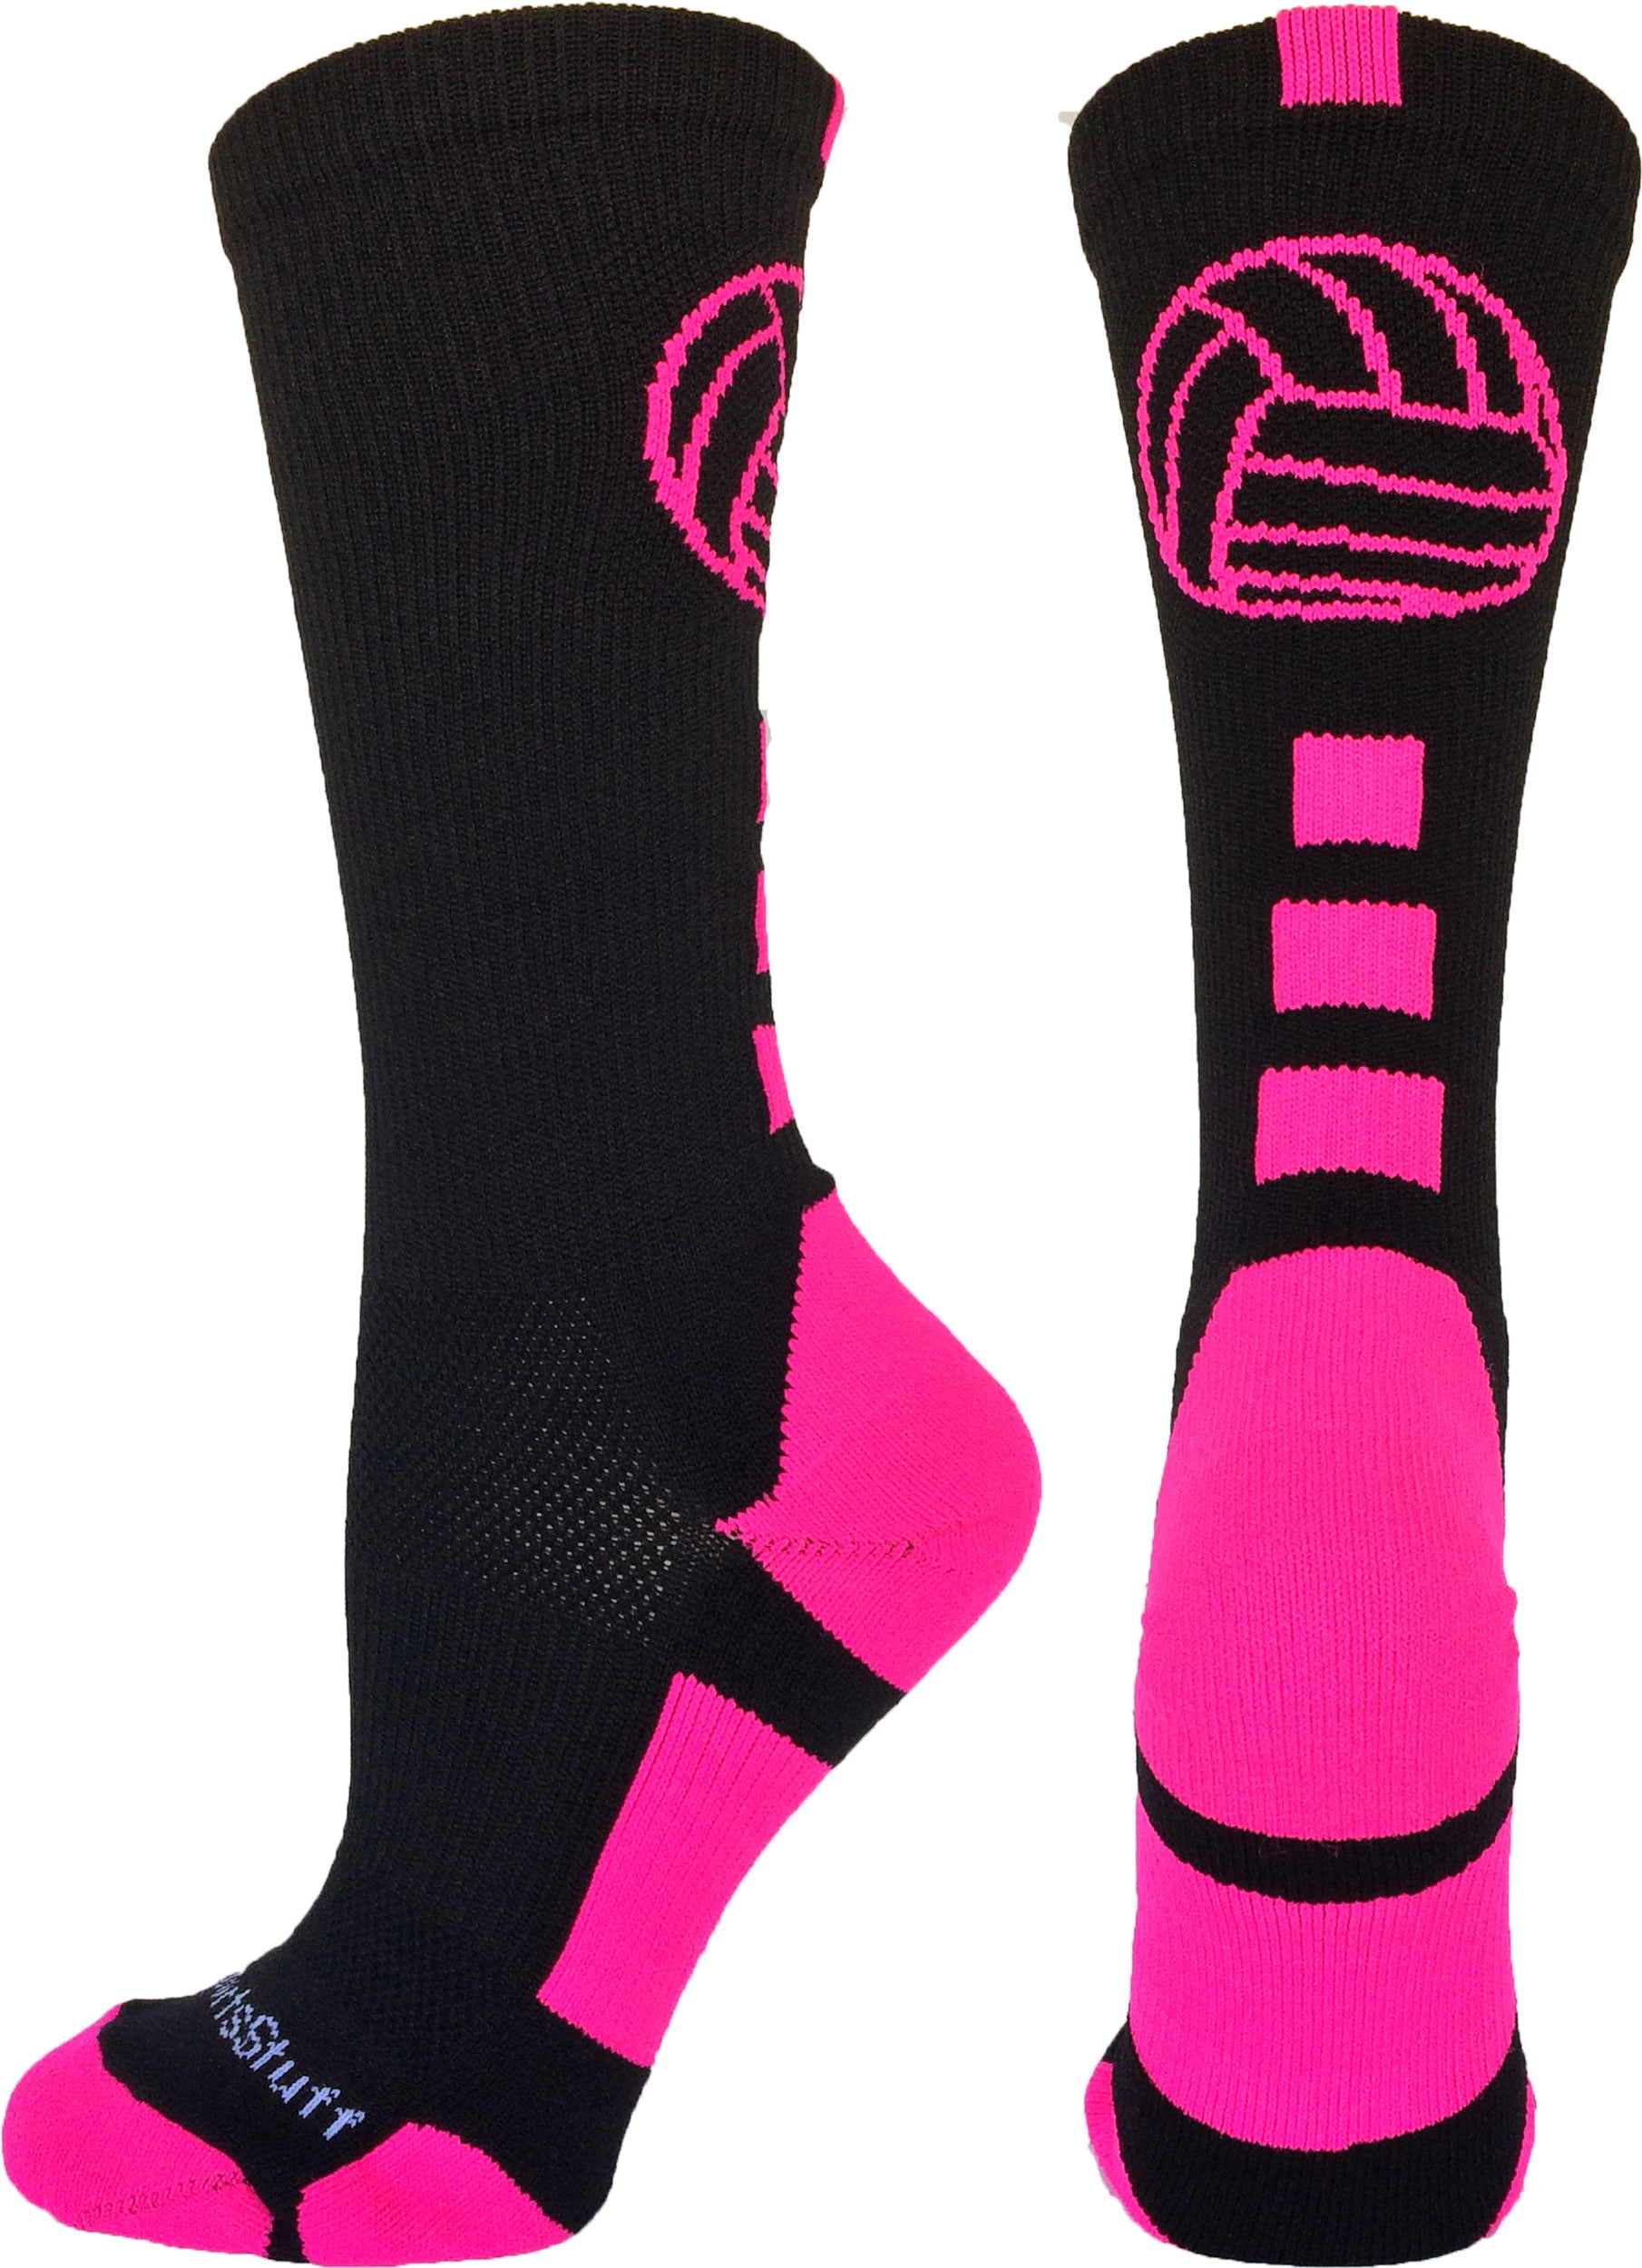 Large, Pink//White Rugby Imports Performance Rugby Socks Hoops